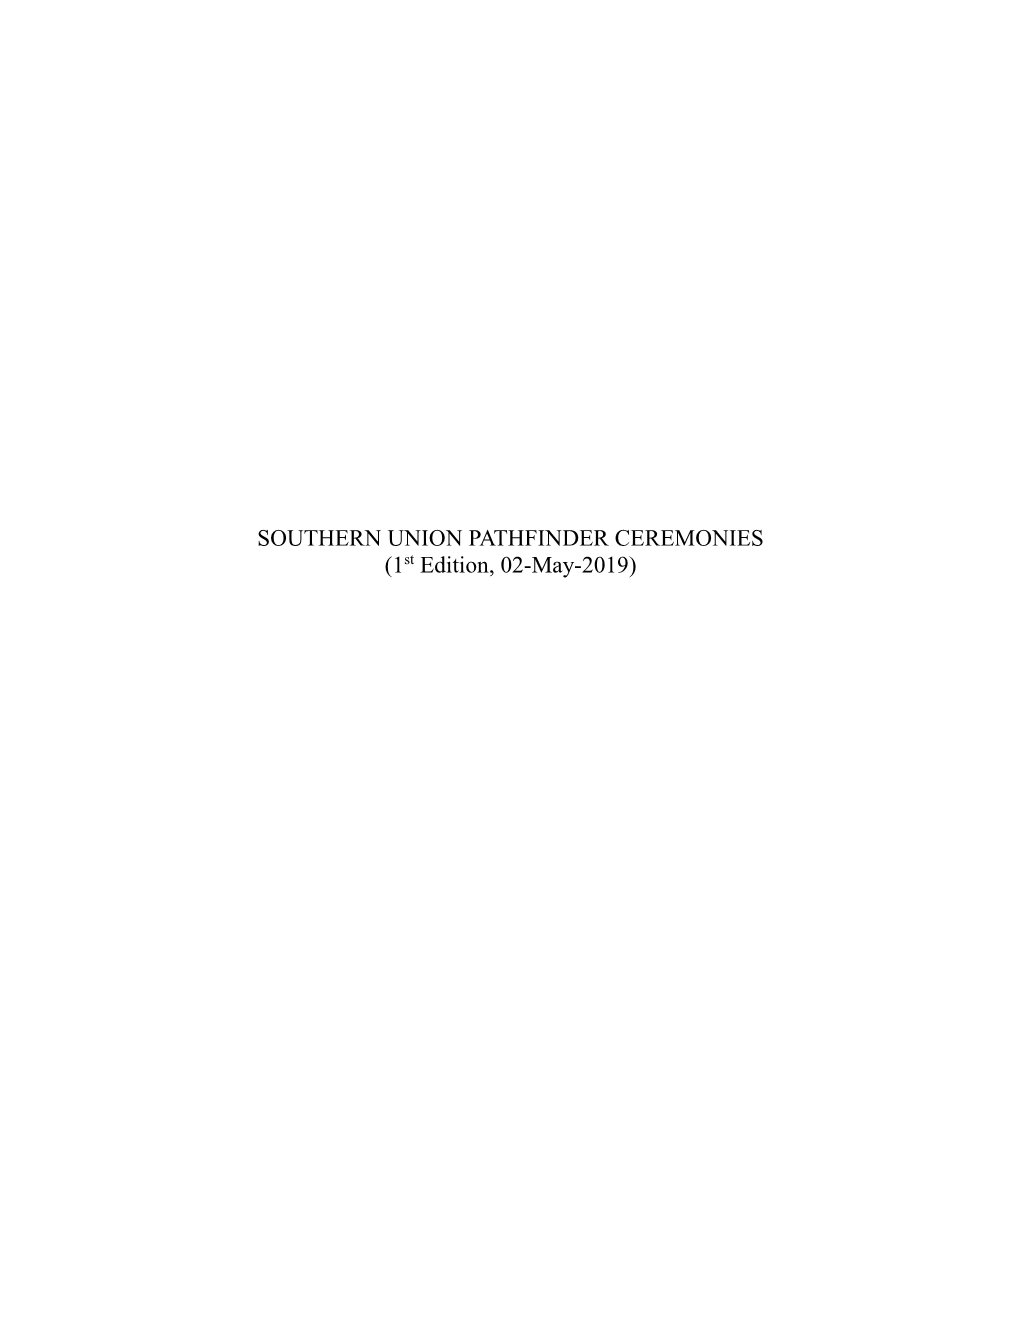 SOUTHERN UNION PATHFINDER CEREMONIES (1St Edition, 02-May-2019)